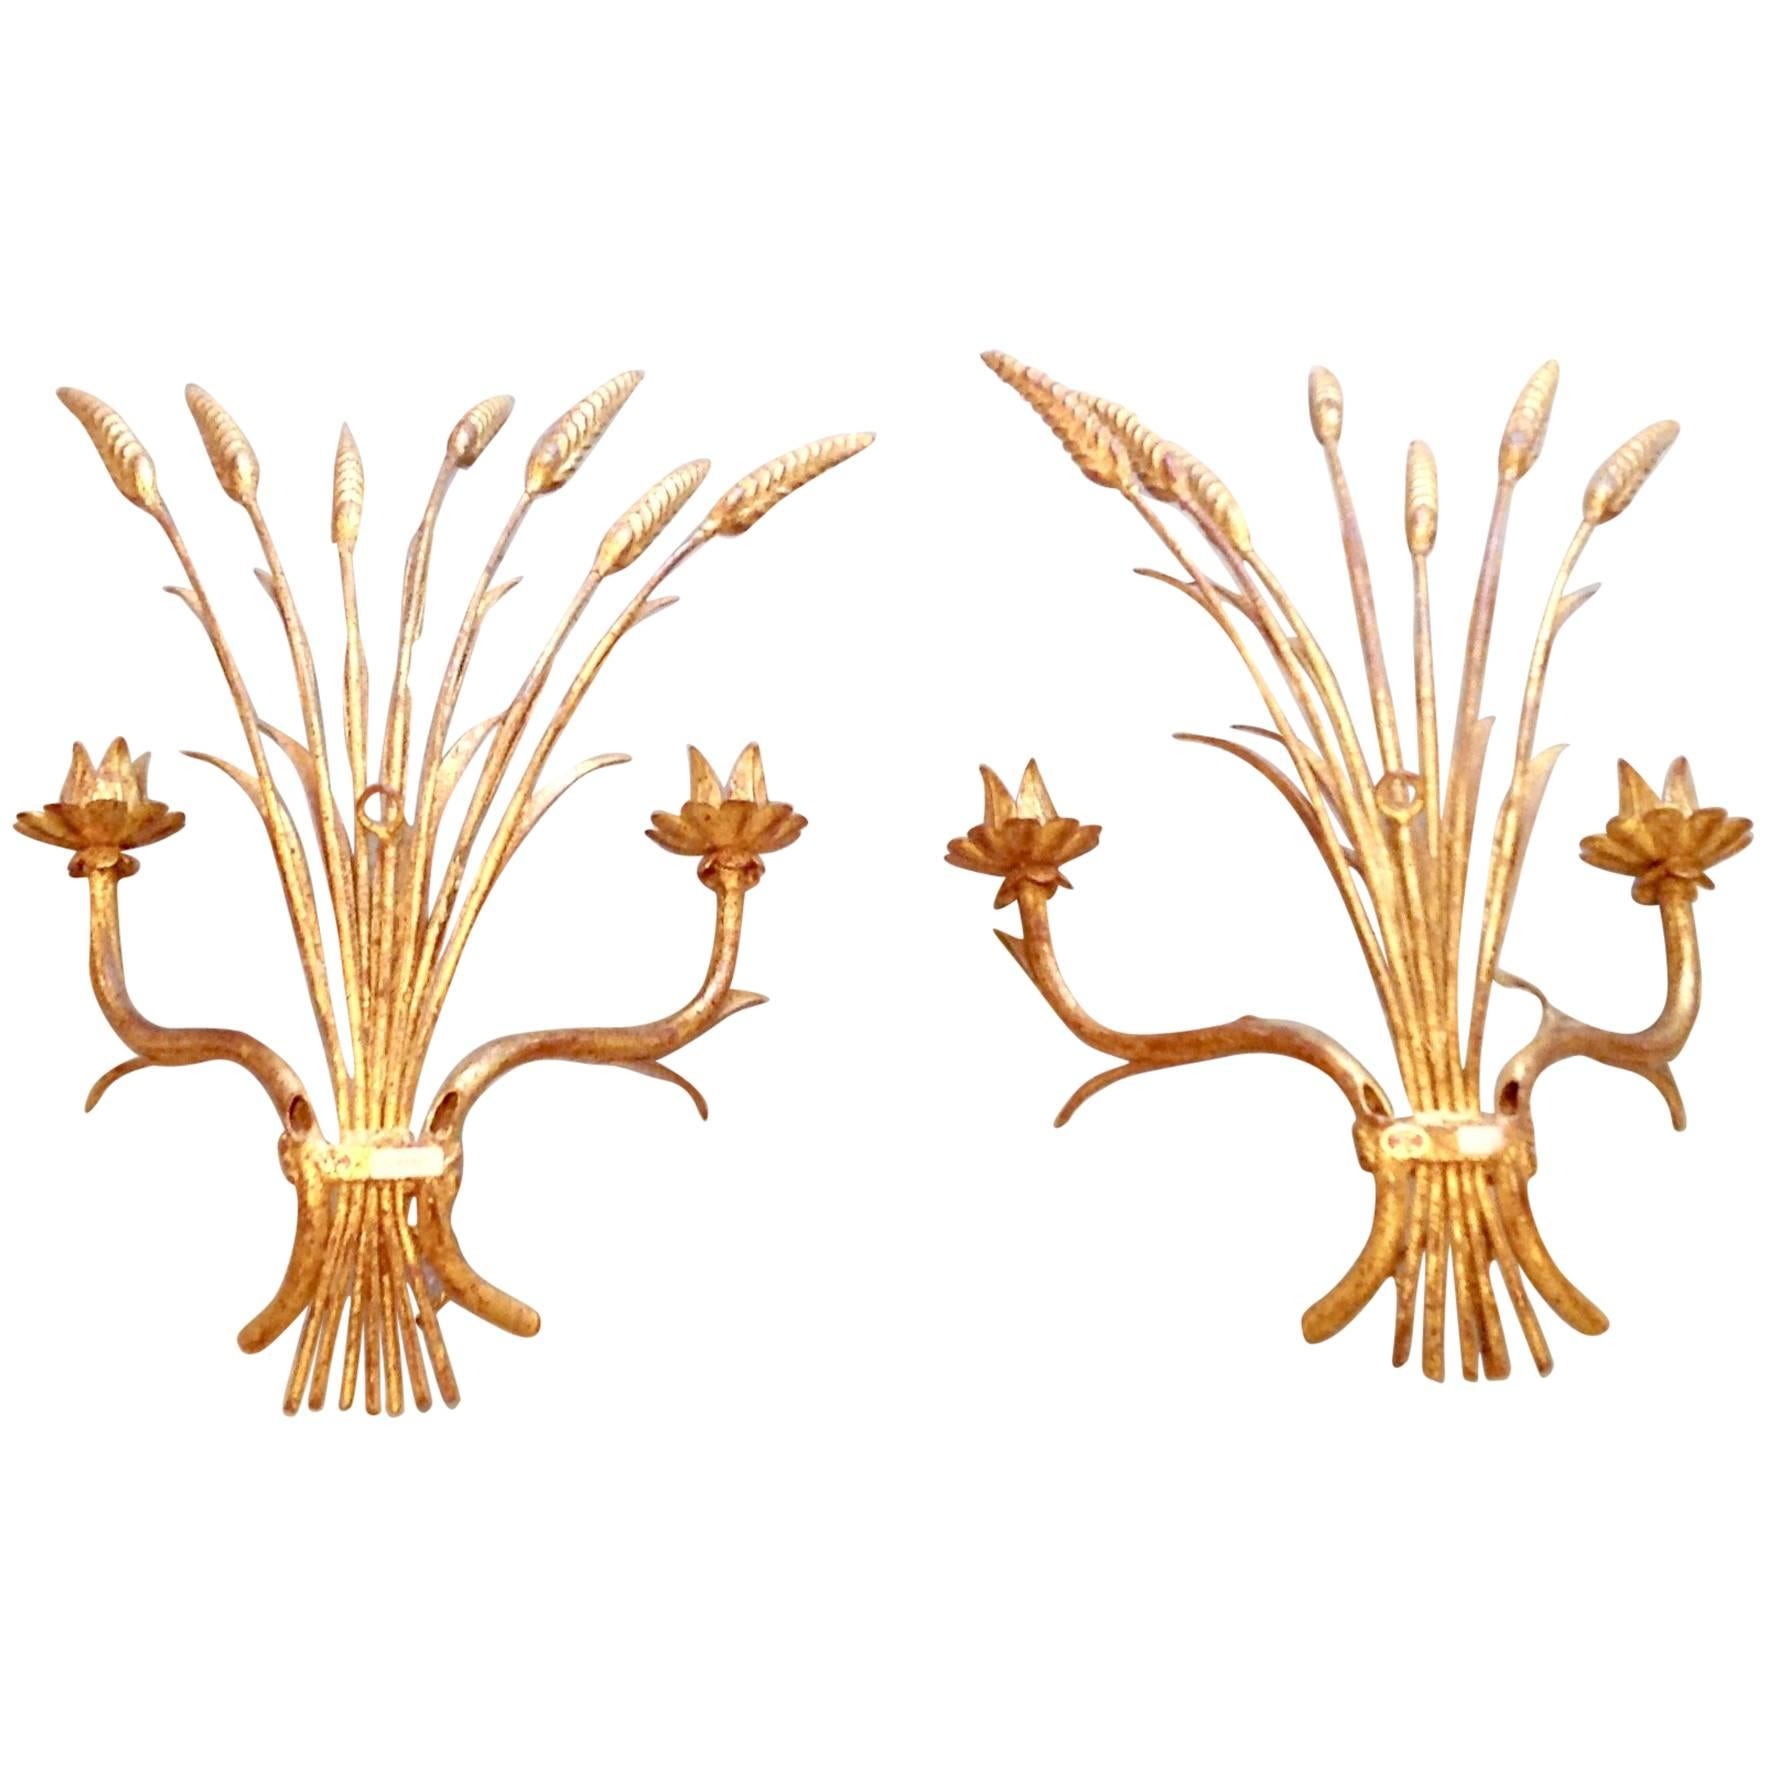 Pair of Vintage Italian Tole Wheat Sconces For Sale